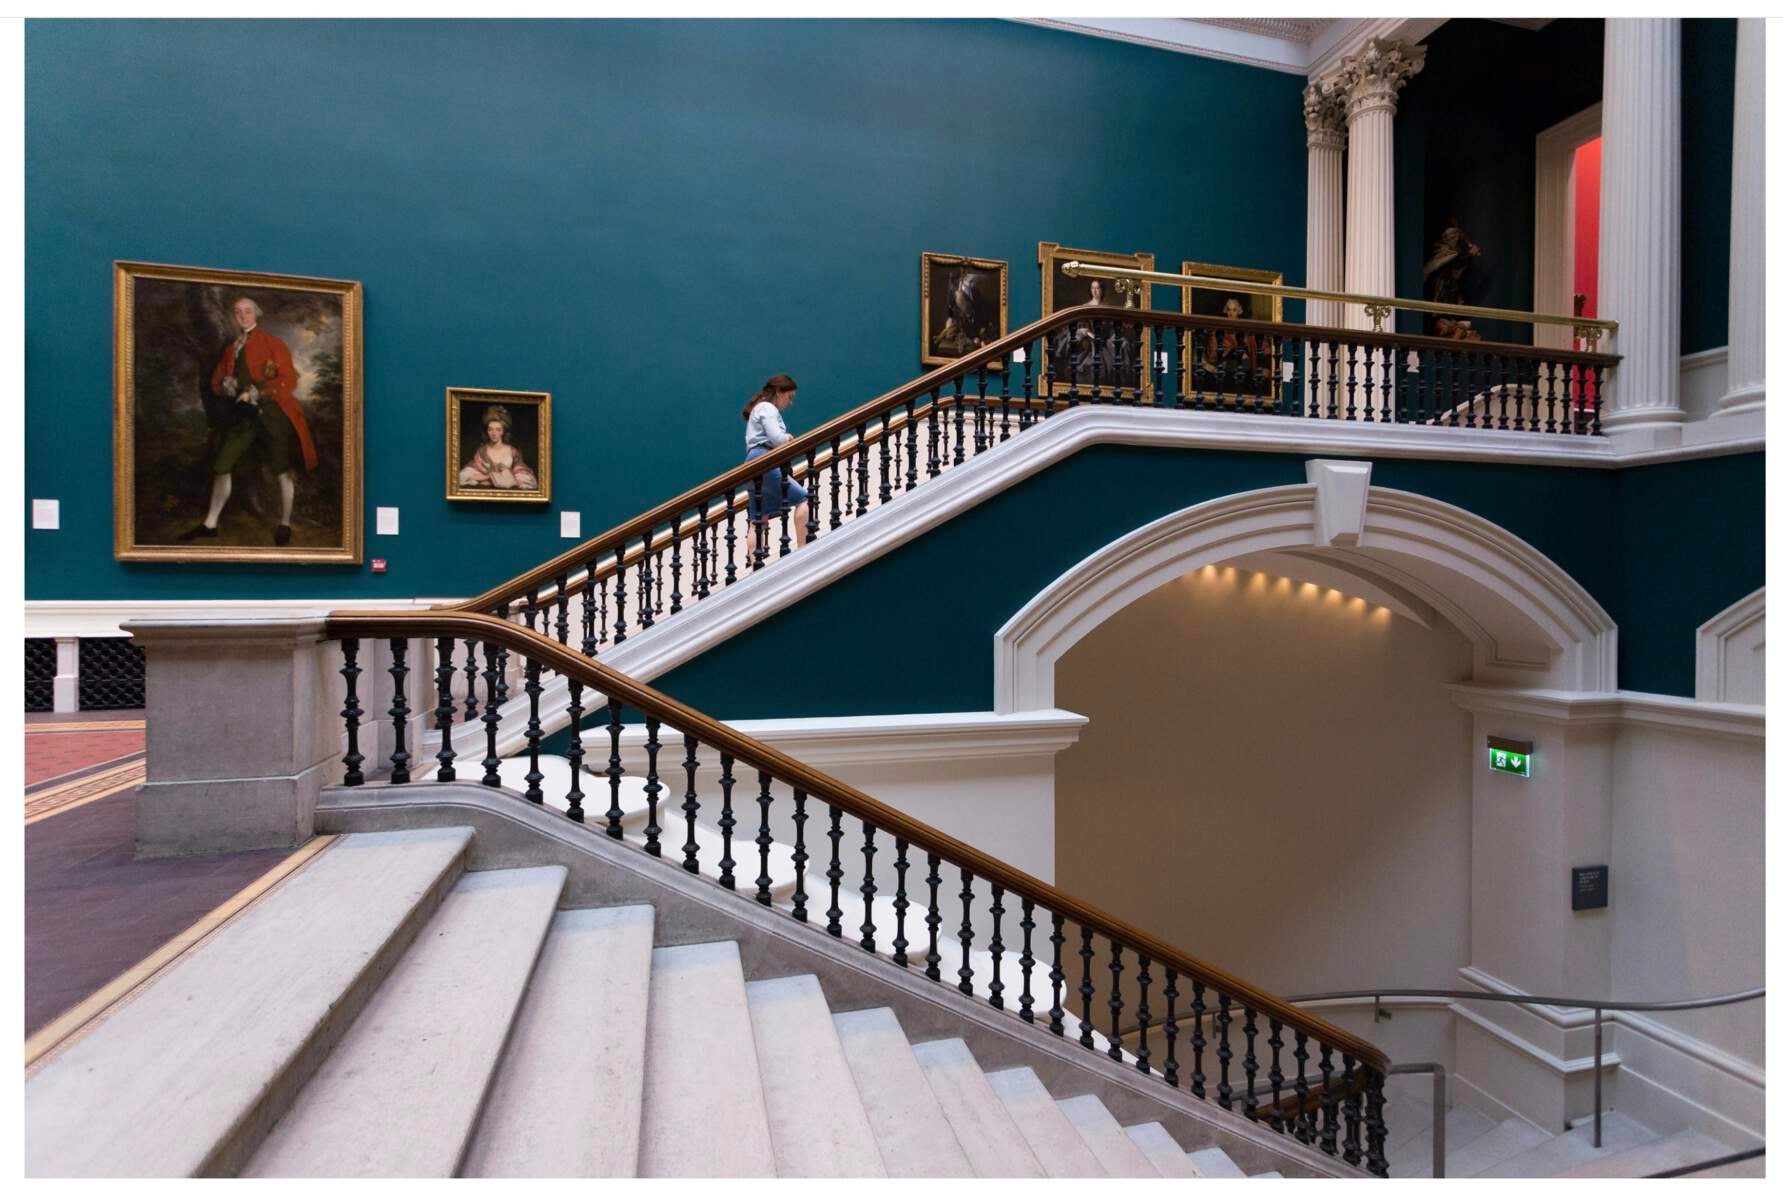 A woman walking up the stair in The National Gallery of Ireland